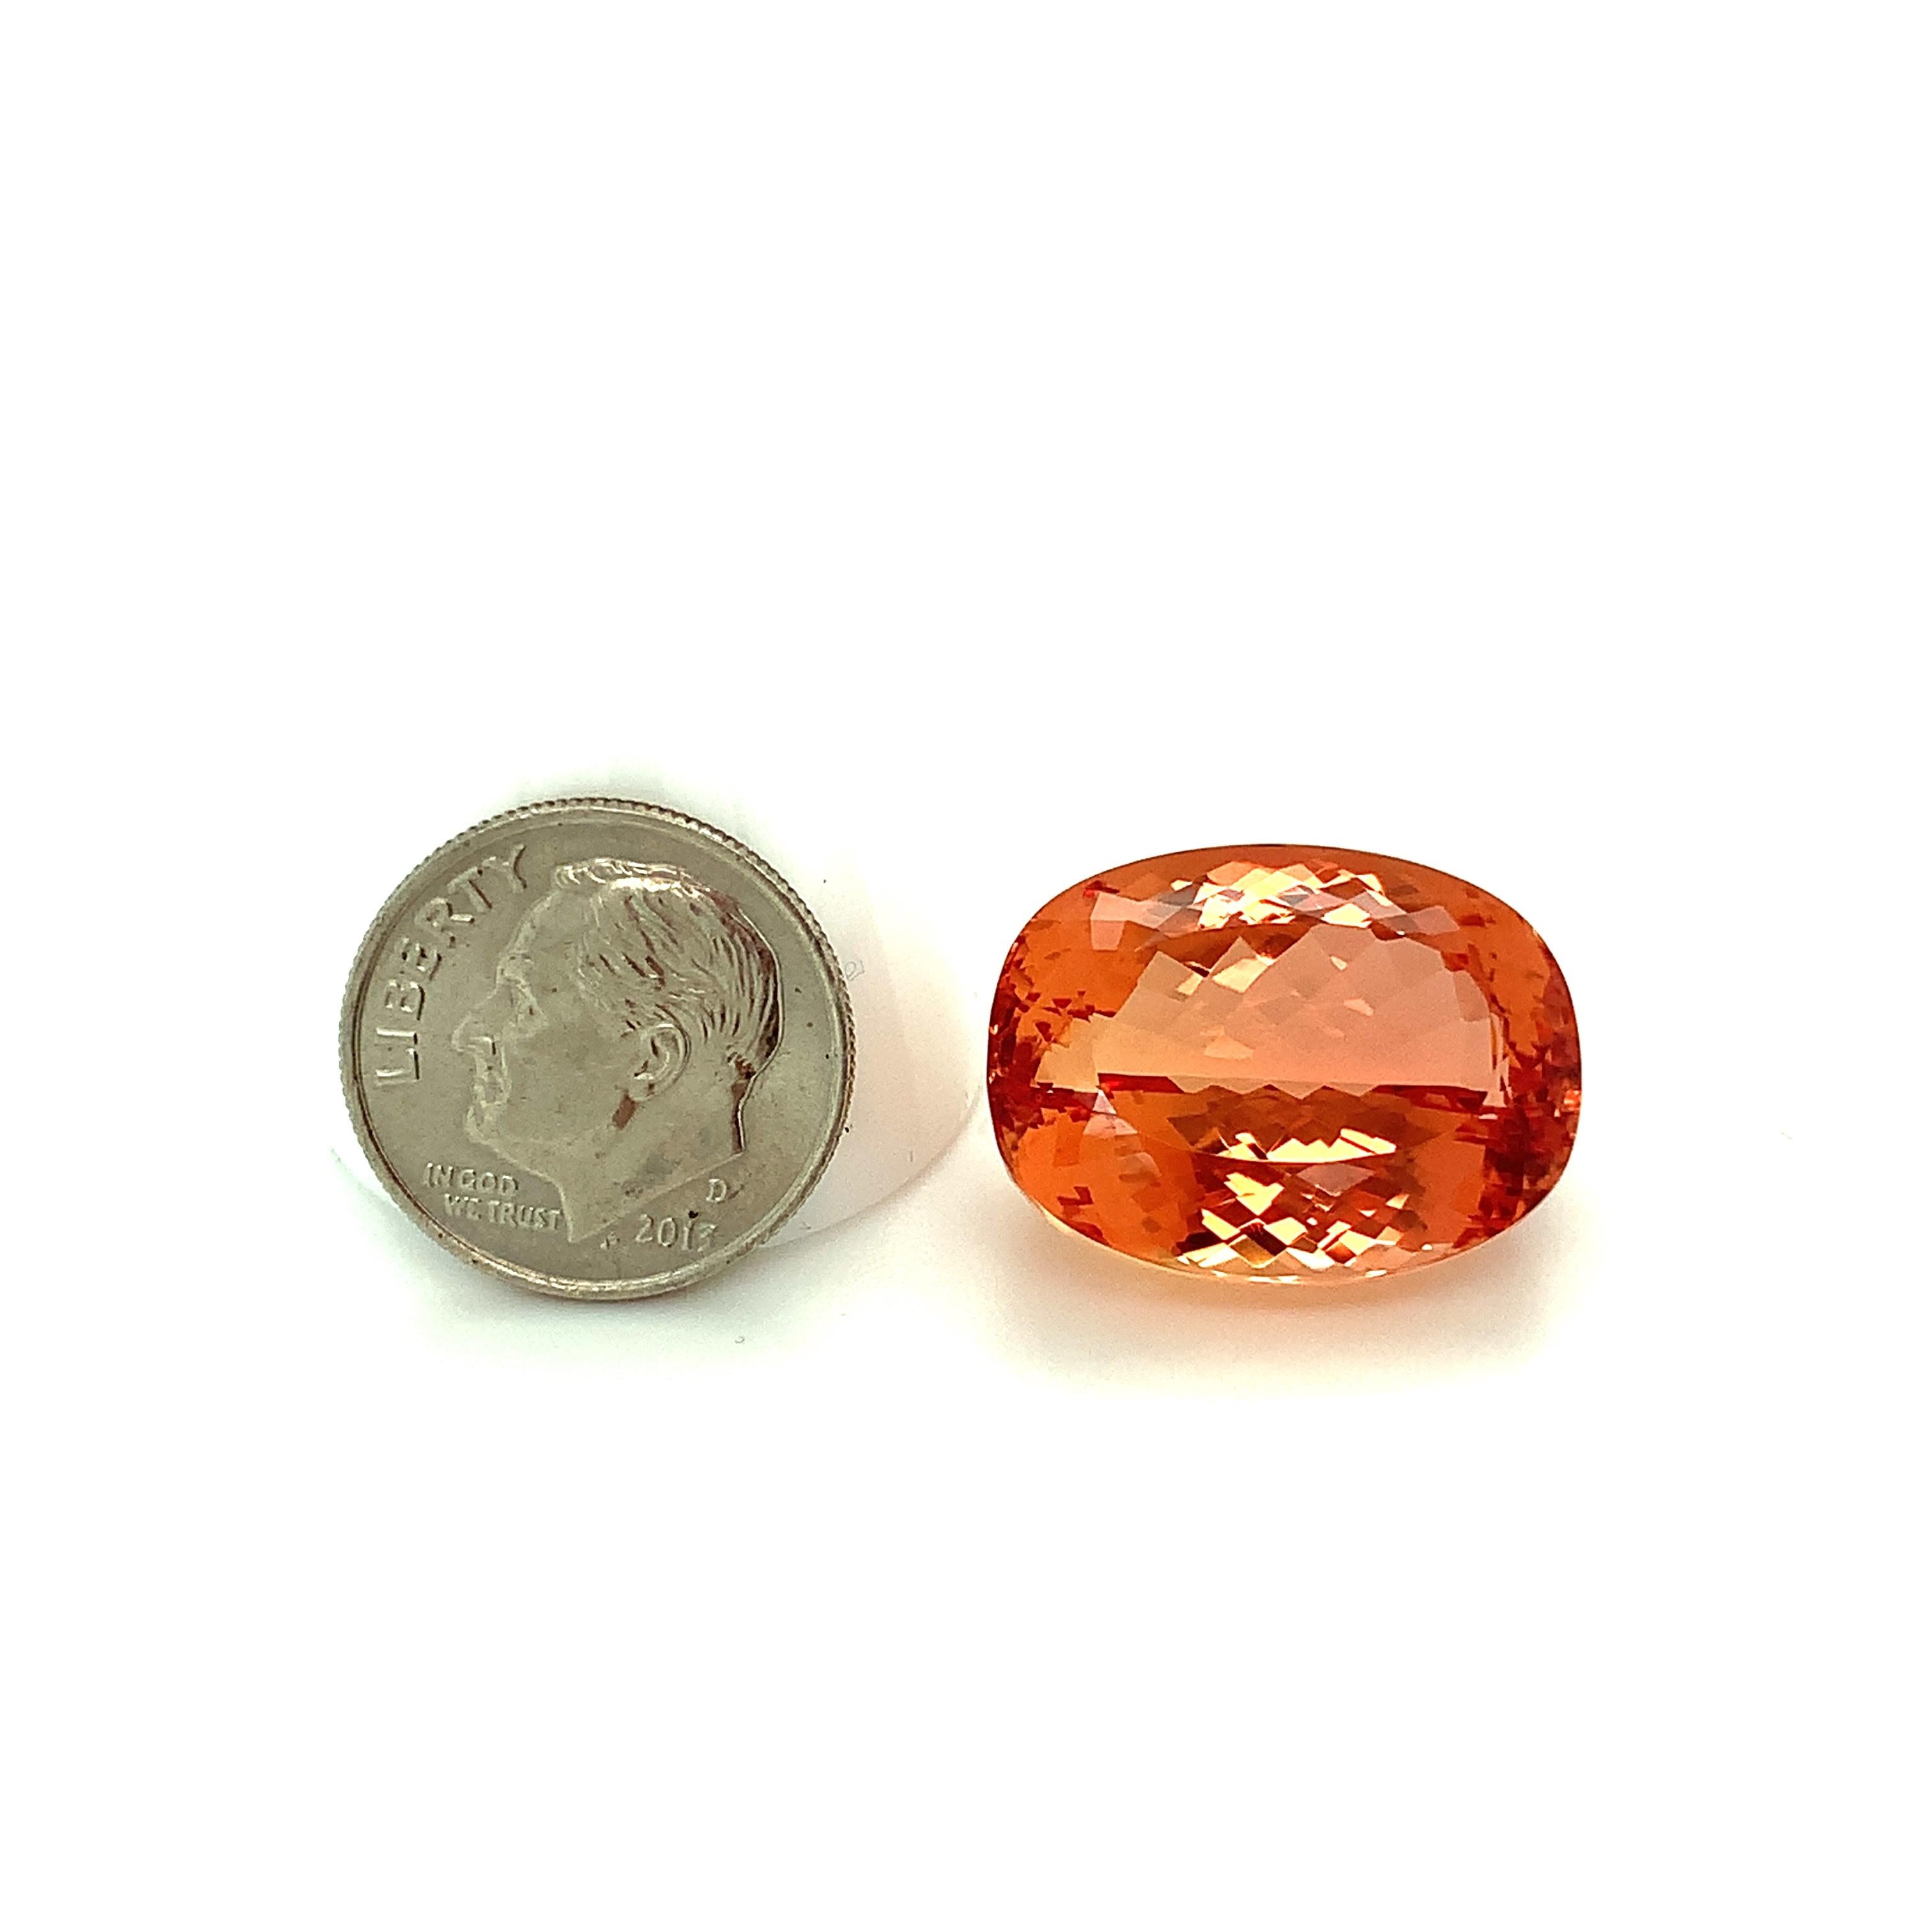 33.95 Carat Imperial Topaz Cushion, Unset Loose Gemstone, GIA Certified For Sale 5